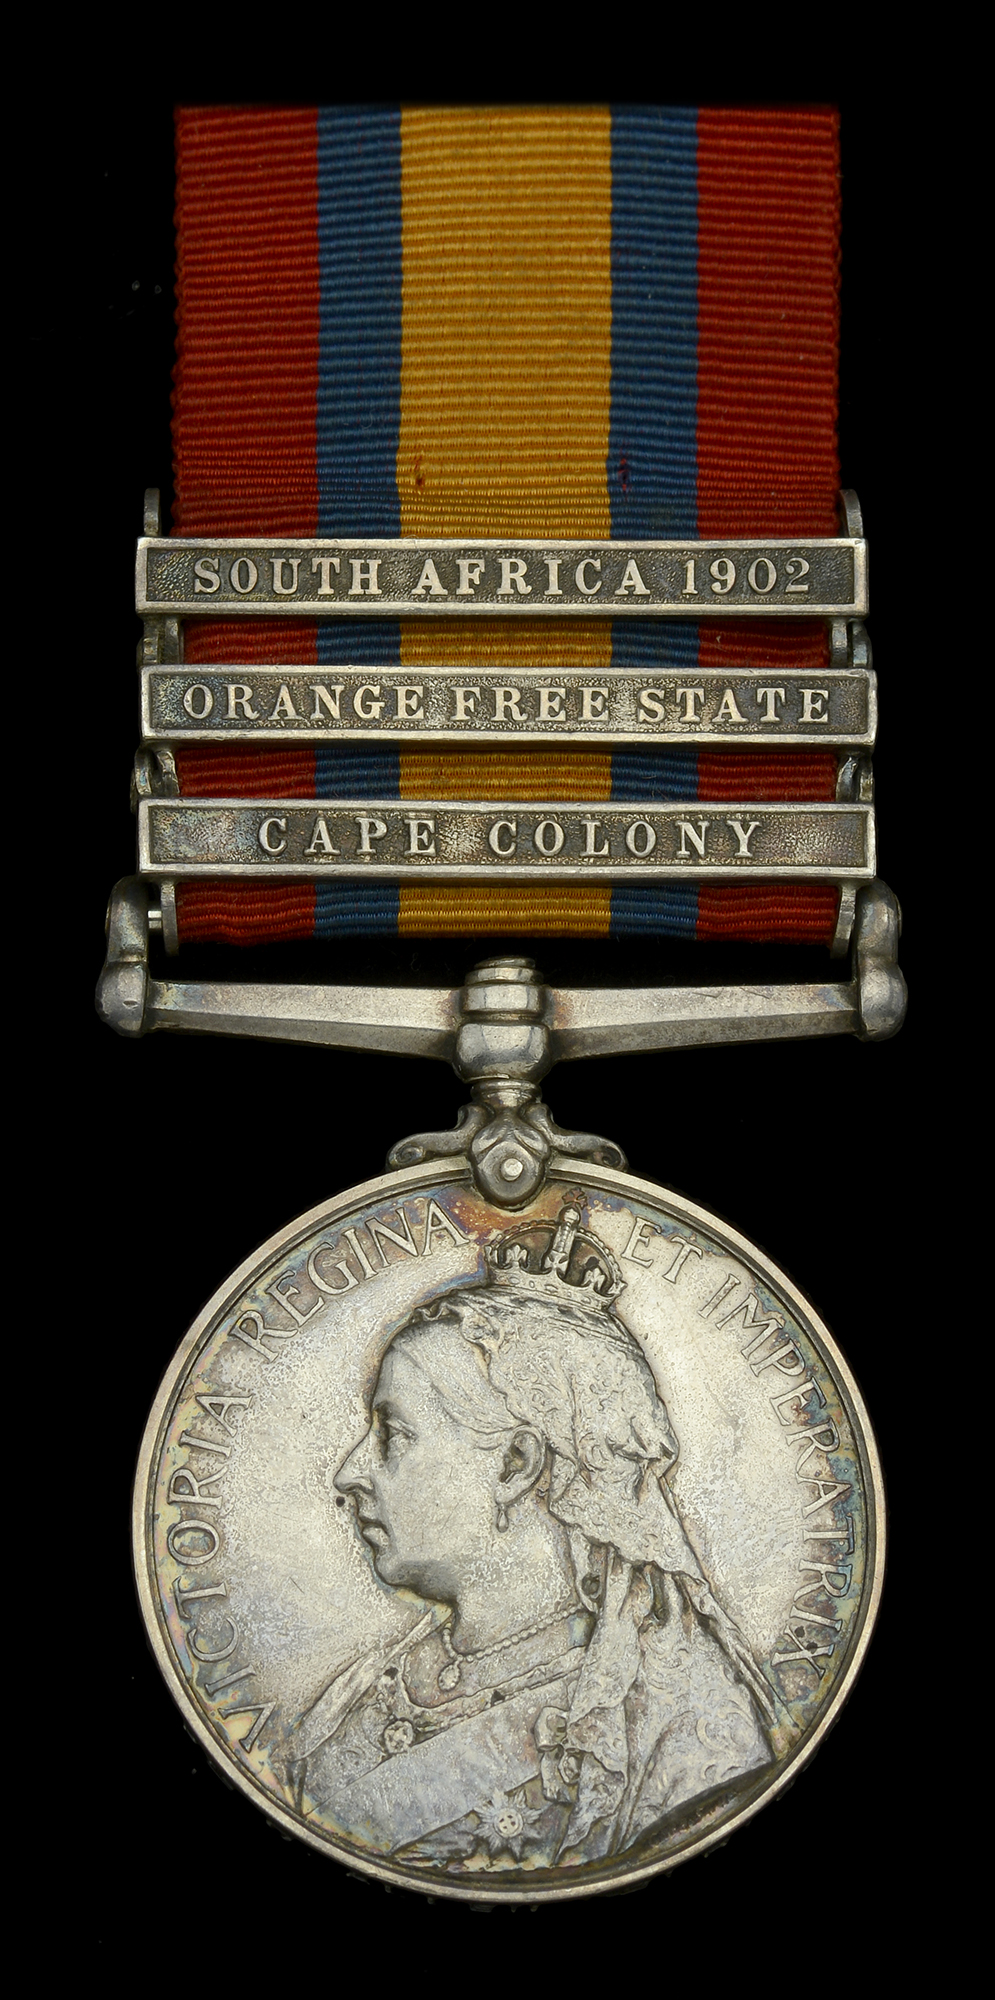 Queen's South Africa 1899-1902, 3 clasps, Cape Colony, Orange Free State, South Africa 1902,...